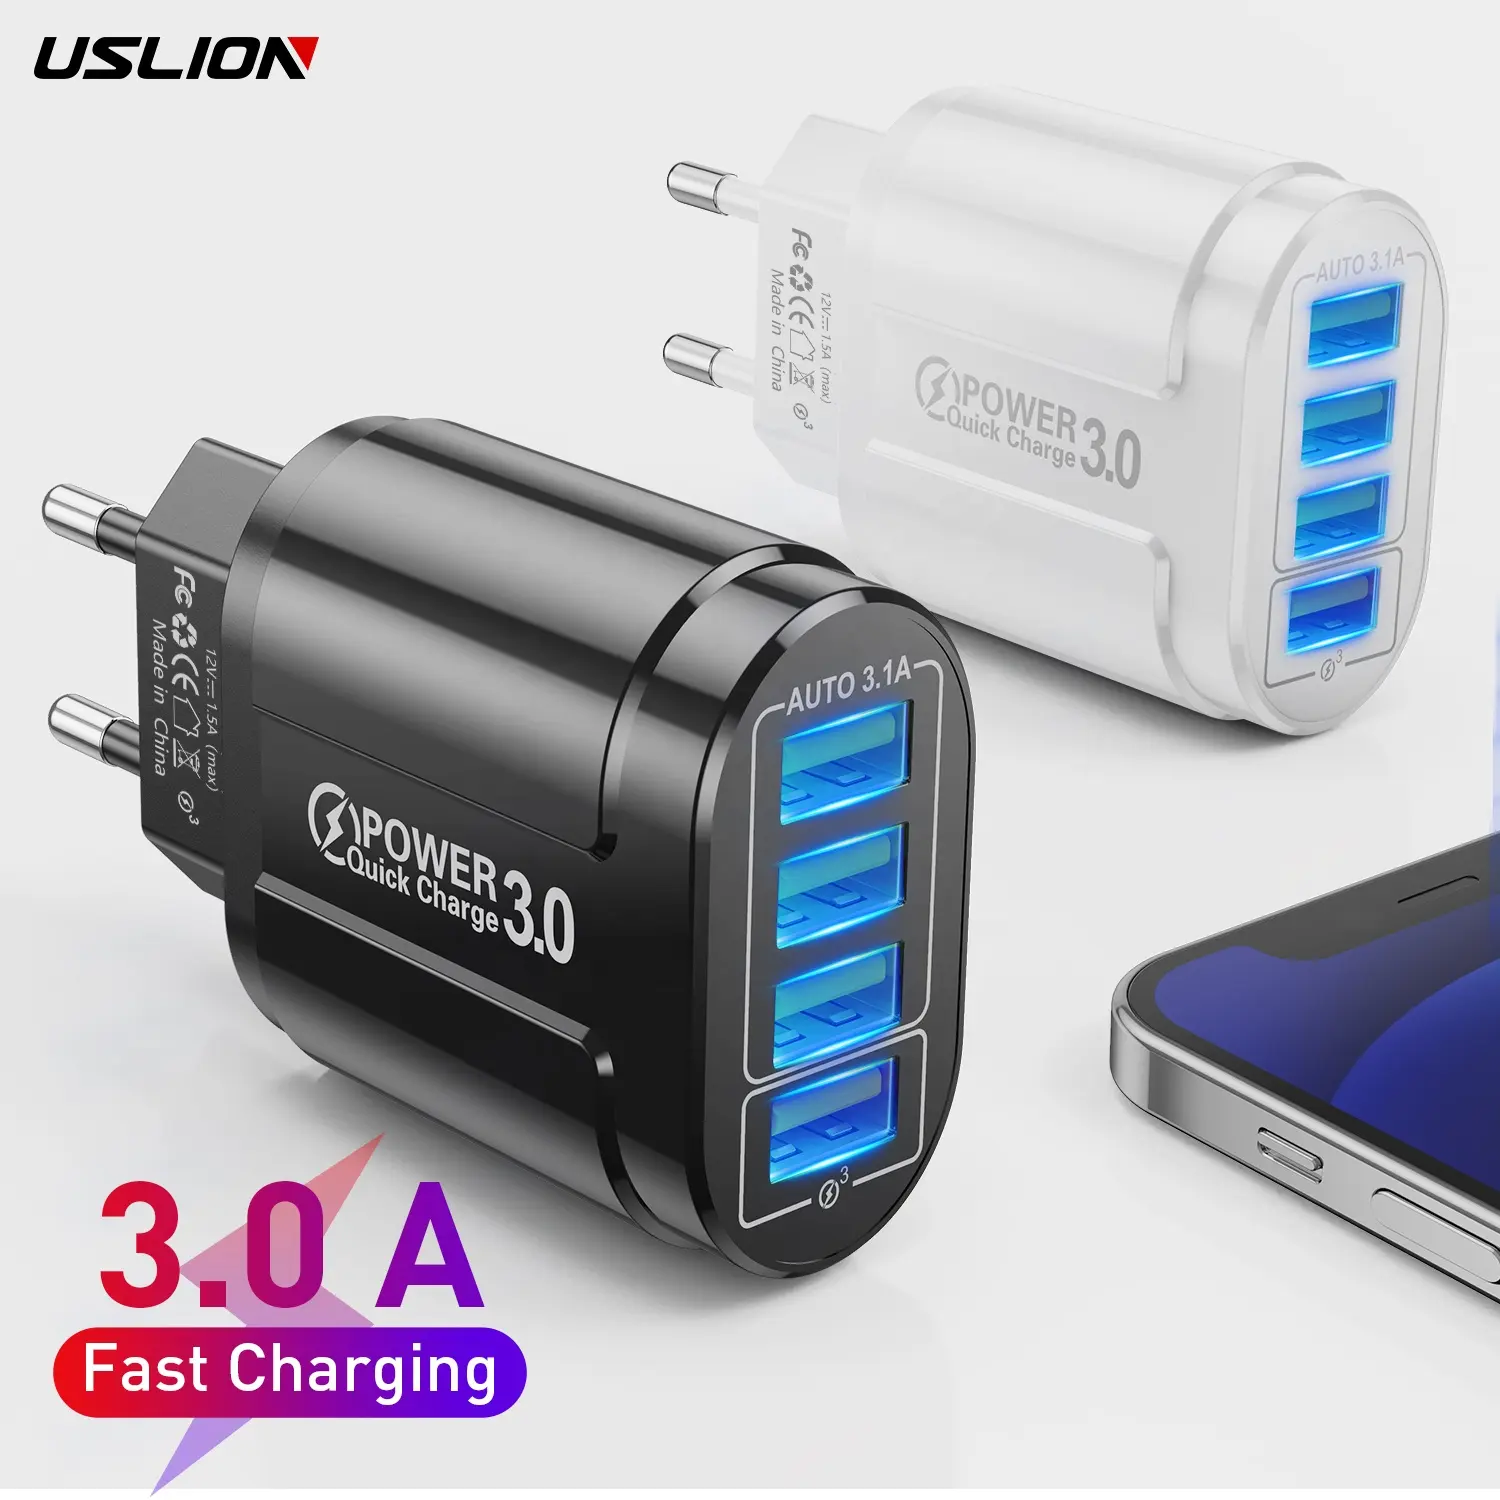 USLION Custom logo 4 Ports 48W Mobile Phone Travel Charger Quick 3A Fast Charging Wall Charger for iPhone Samsung USB Charger